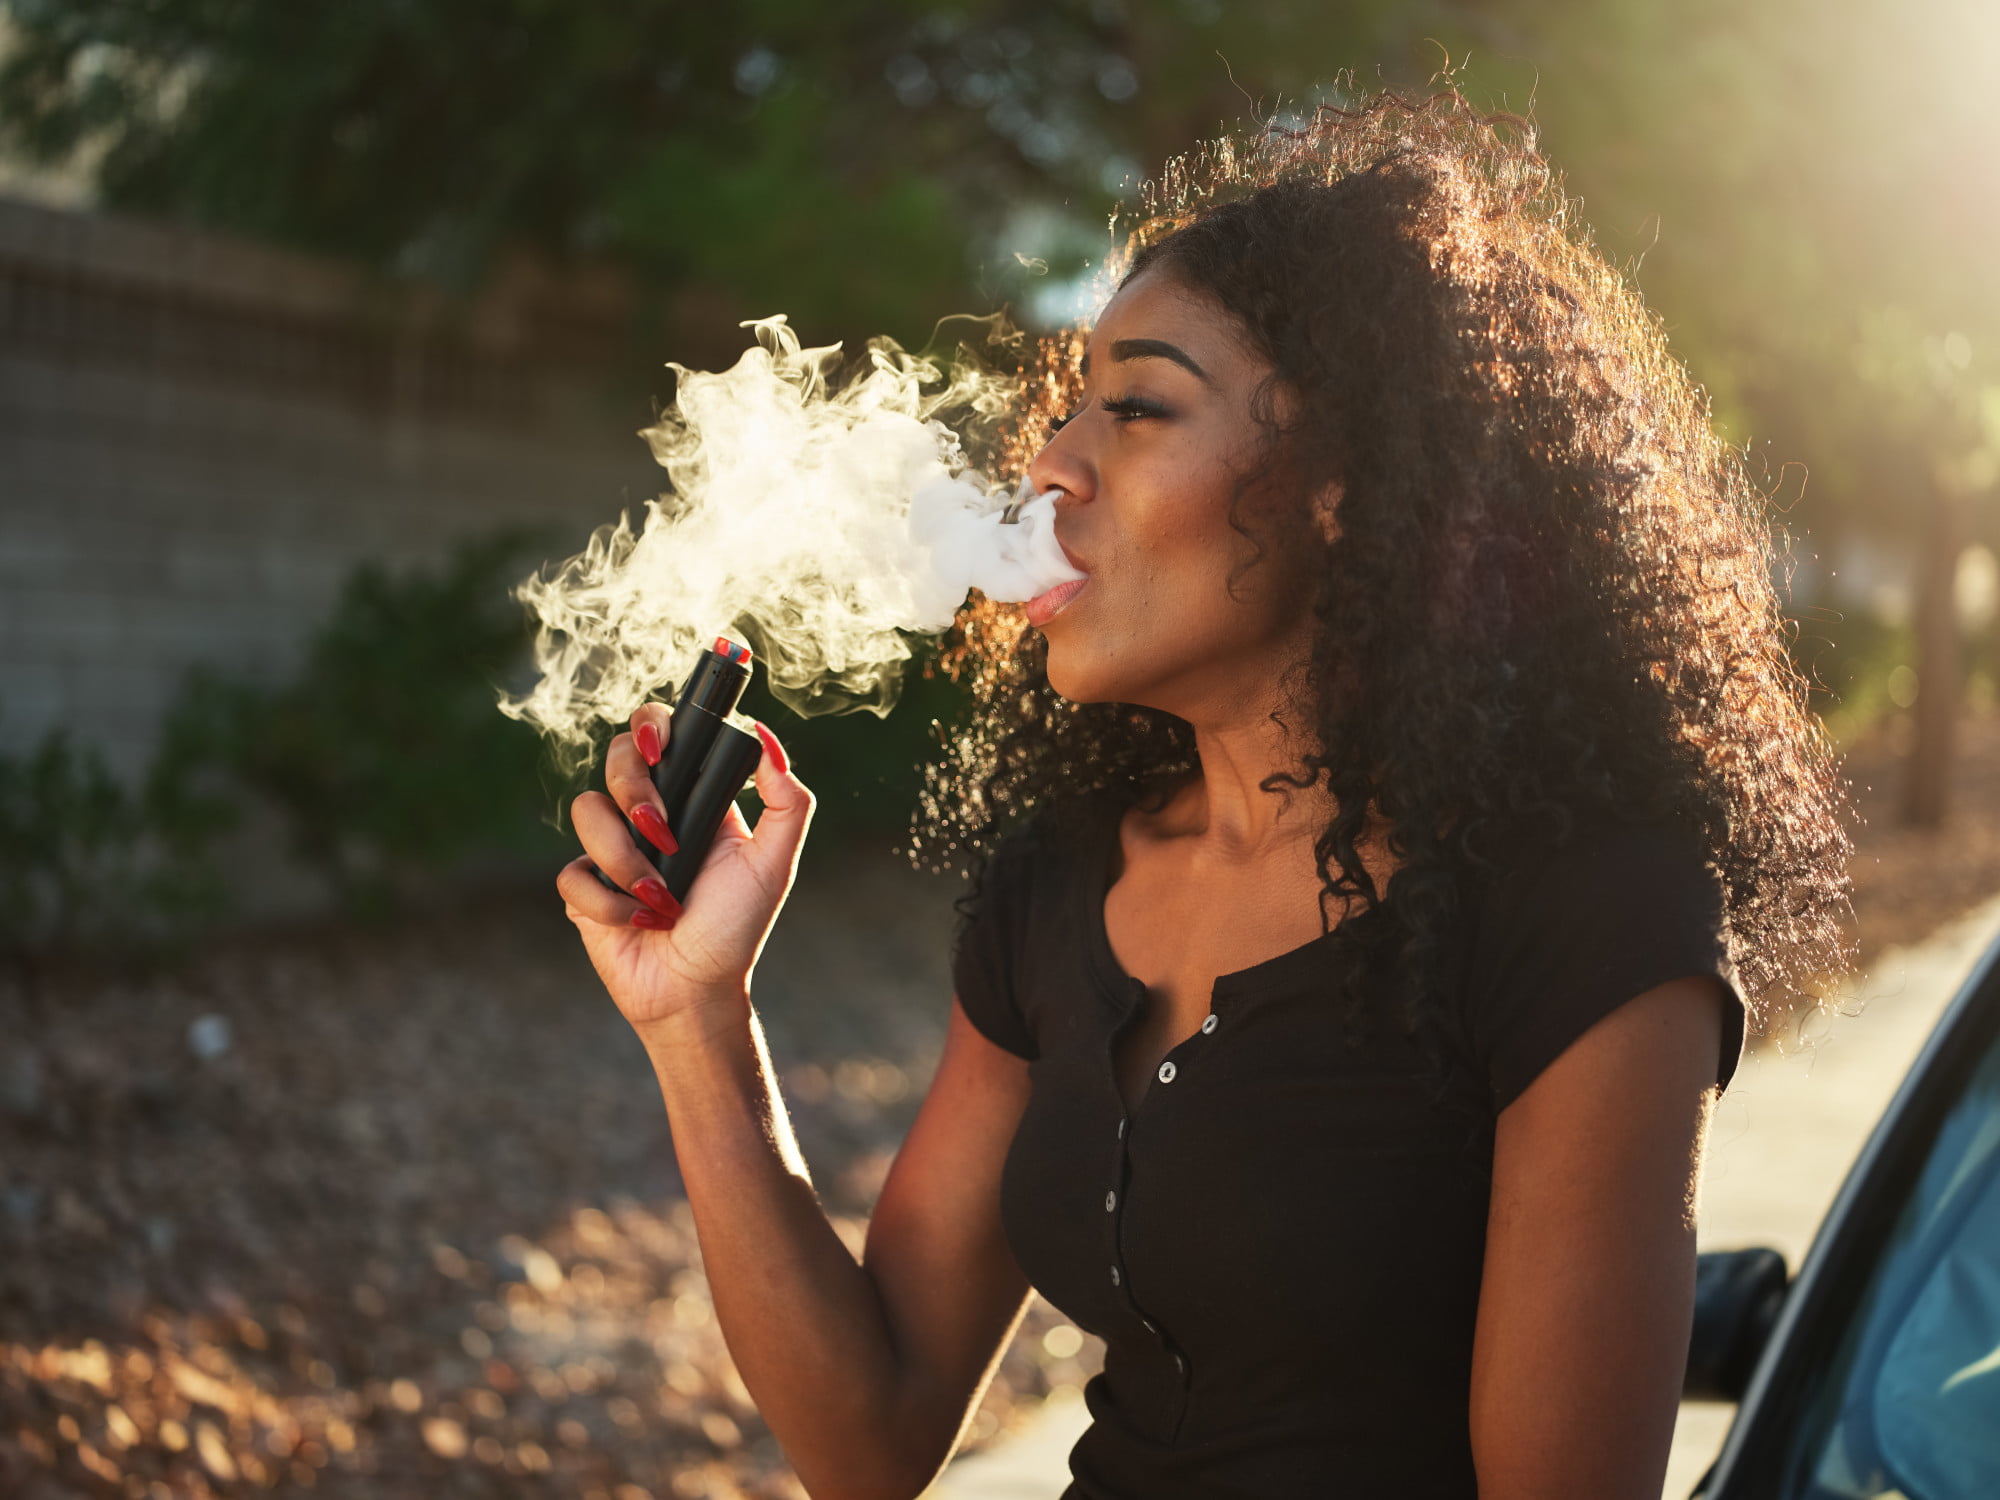 When it comes to purchasing small vapes, there are several things you need to keep in mind. Learn more about your options right here.